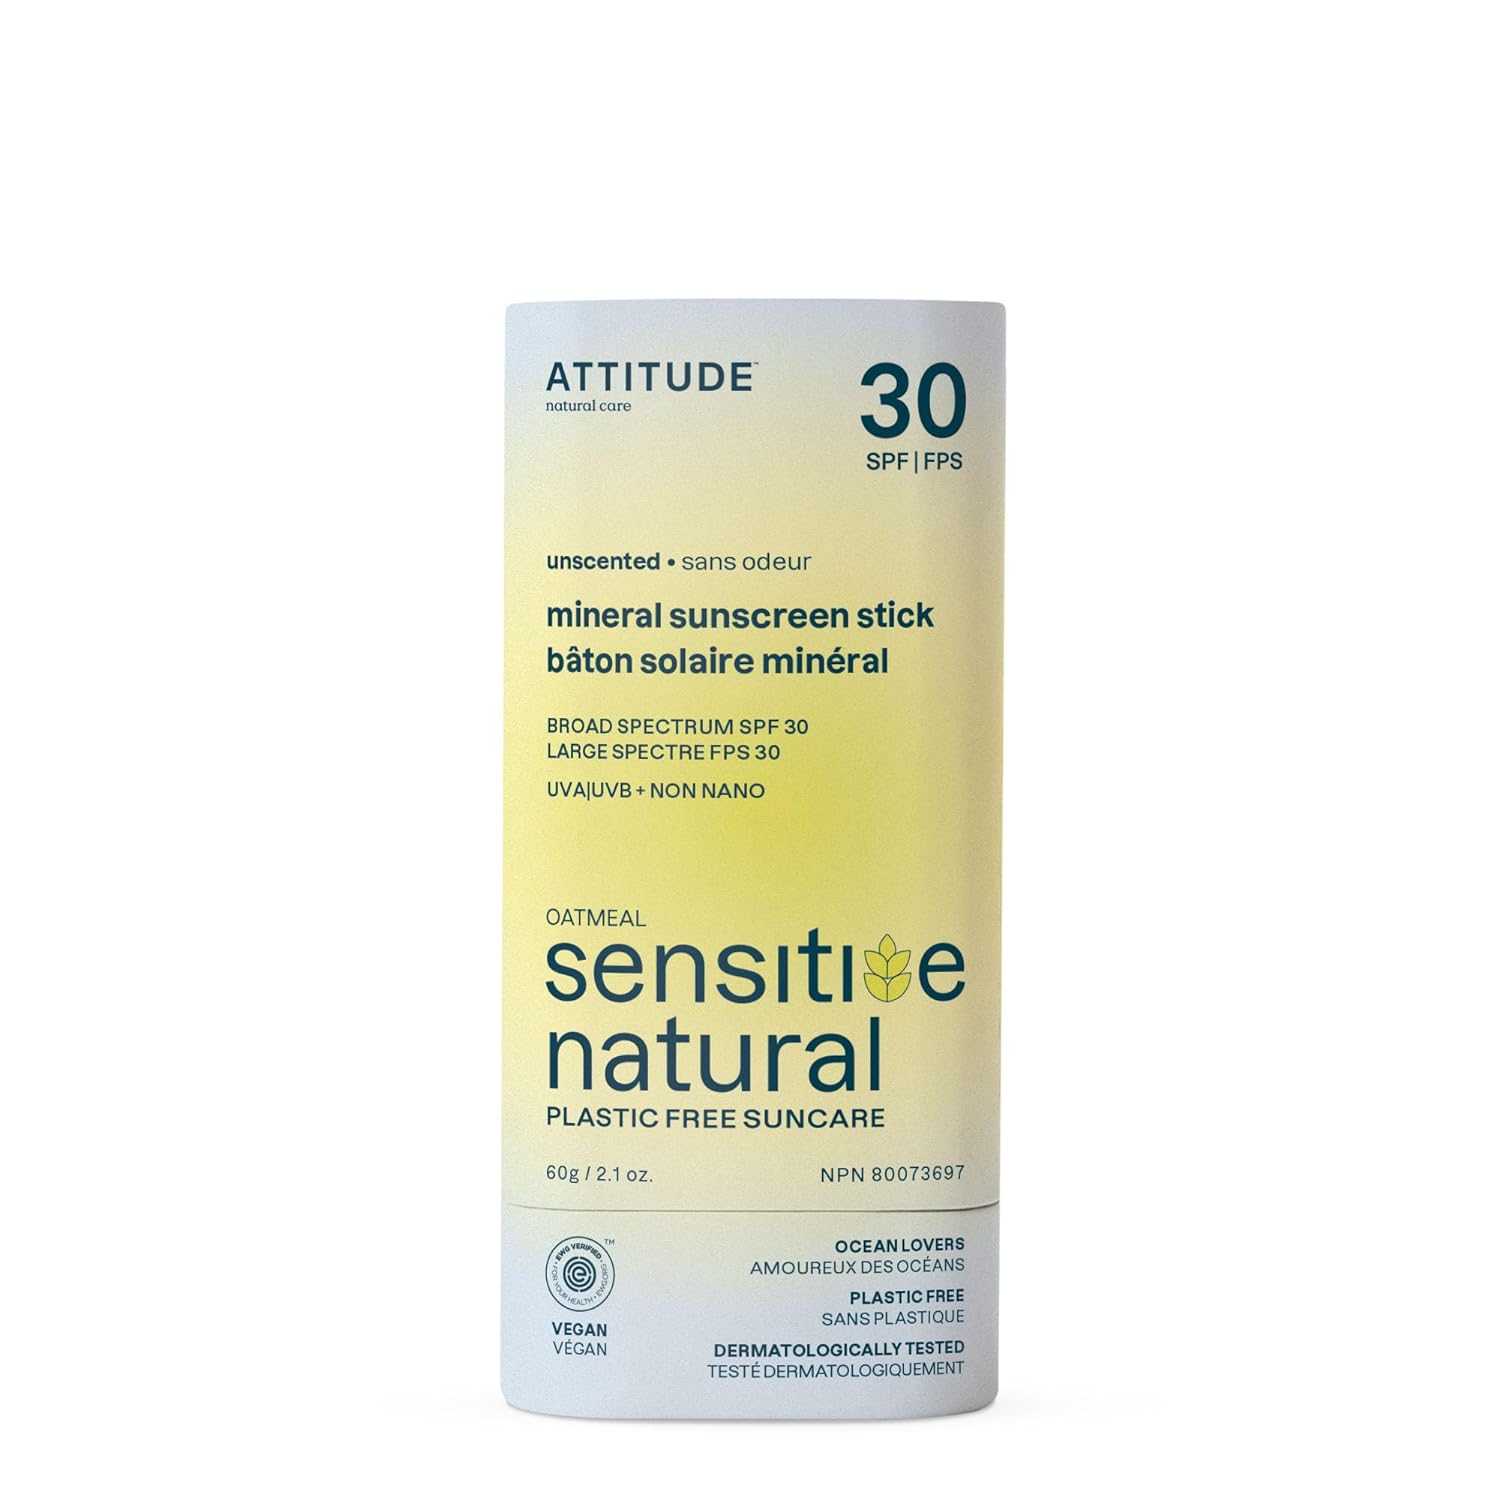 ATTITUDE Mineral Sunscreen Stick for Sensitive Skin, SPF 30, EWG Verified, Plastic-Free, Broad Spectrum UVA/UVB Protection with Zinc Oxide, Dermatologically Tested, Vegan, Unscented, 2.1 Ounces